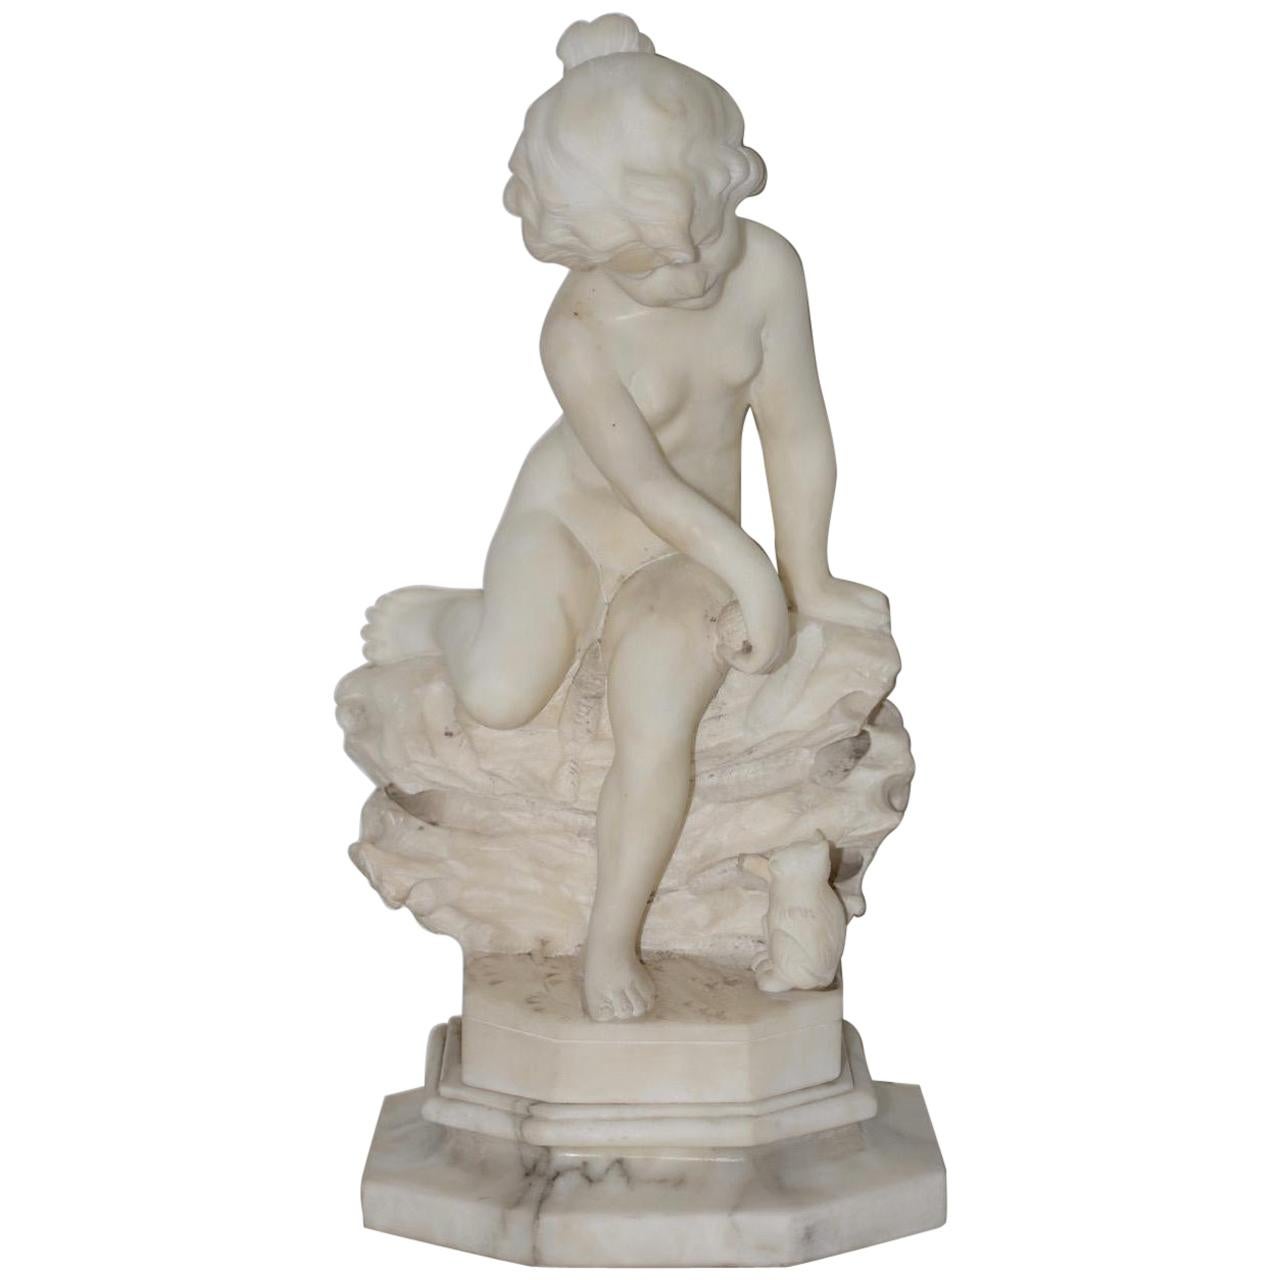 19th-Early 20th Century Marble Sculpture Young Child with Kitten, circa 1920